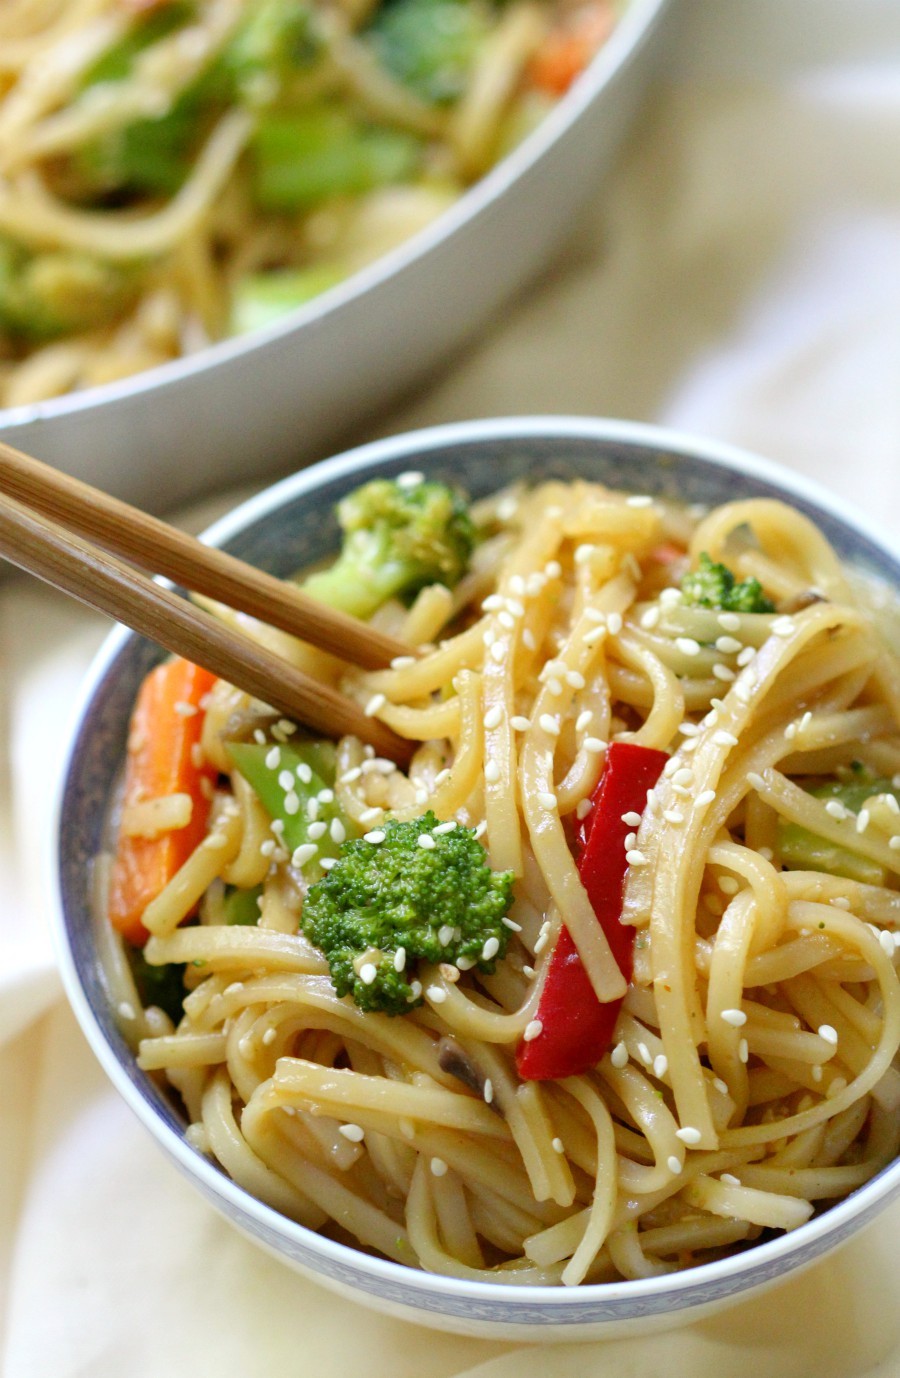 10-Minute Gluten-Free Vegetable Lo Mein (Vegan, Allergy-Free) | Strength and Sunshine @RebeccaGF666 You can have this side dish on the table in 10 minutes! A quick & easy 10-Minute Gluten-Free Vegetable Lo Mein recipe that's better than Chinese take-out, is vegan, and top-8 allergy-free! Great for dinner and perfect for using as healthy leftover lunches! #lomein #glutenfree #vegan #noodles #chinesefood #takeout